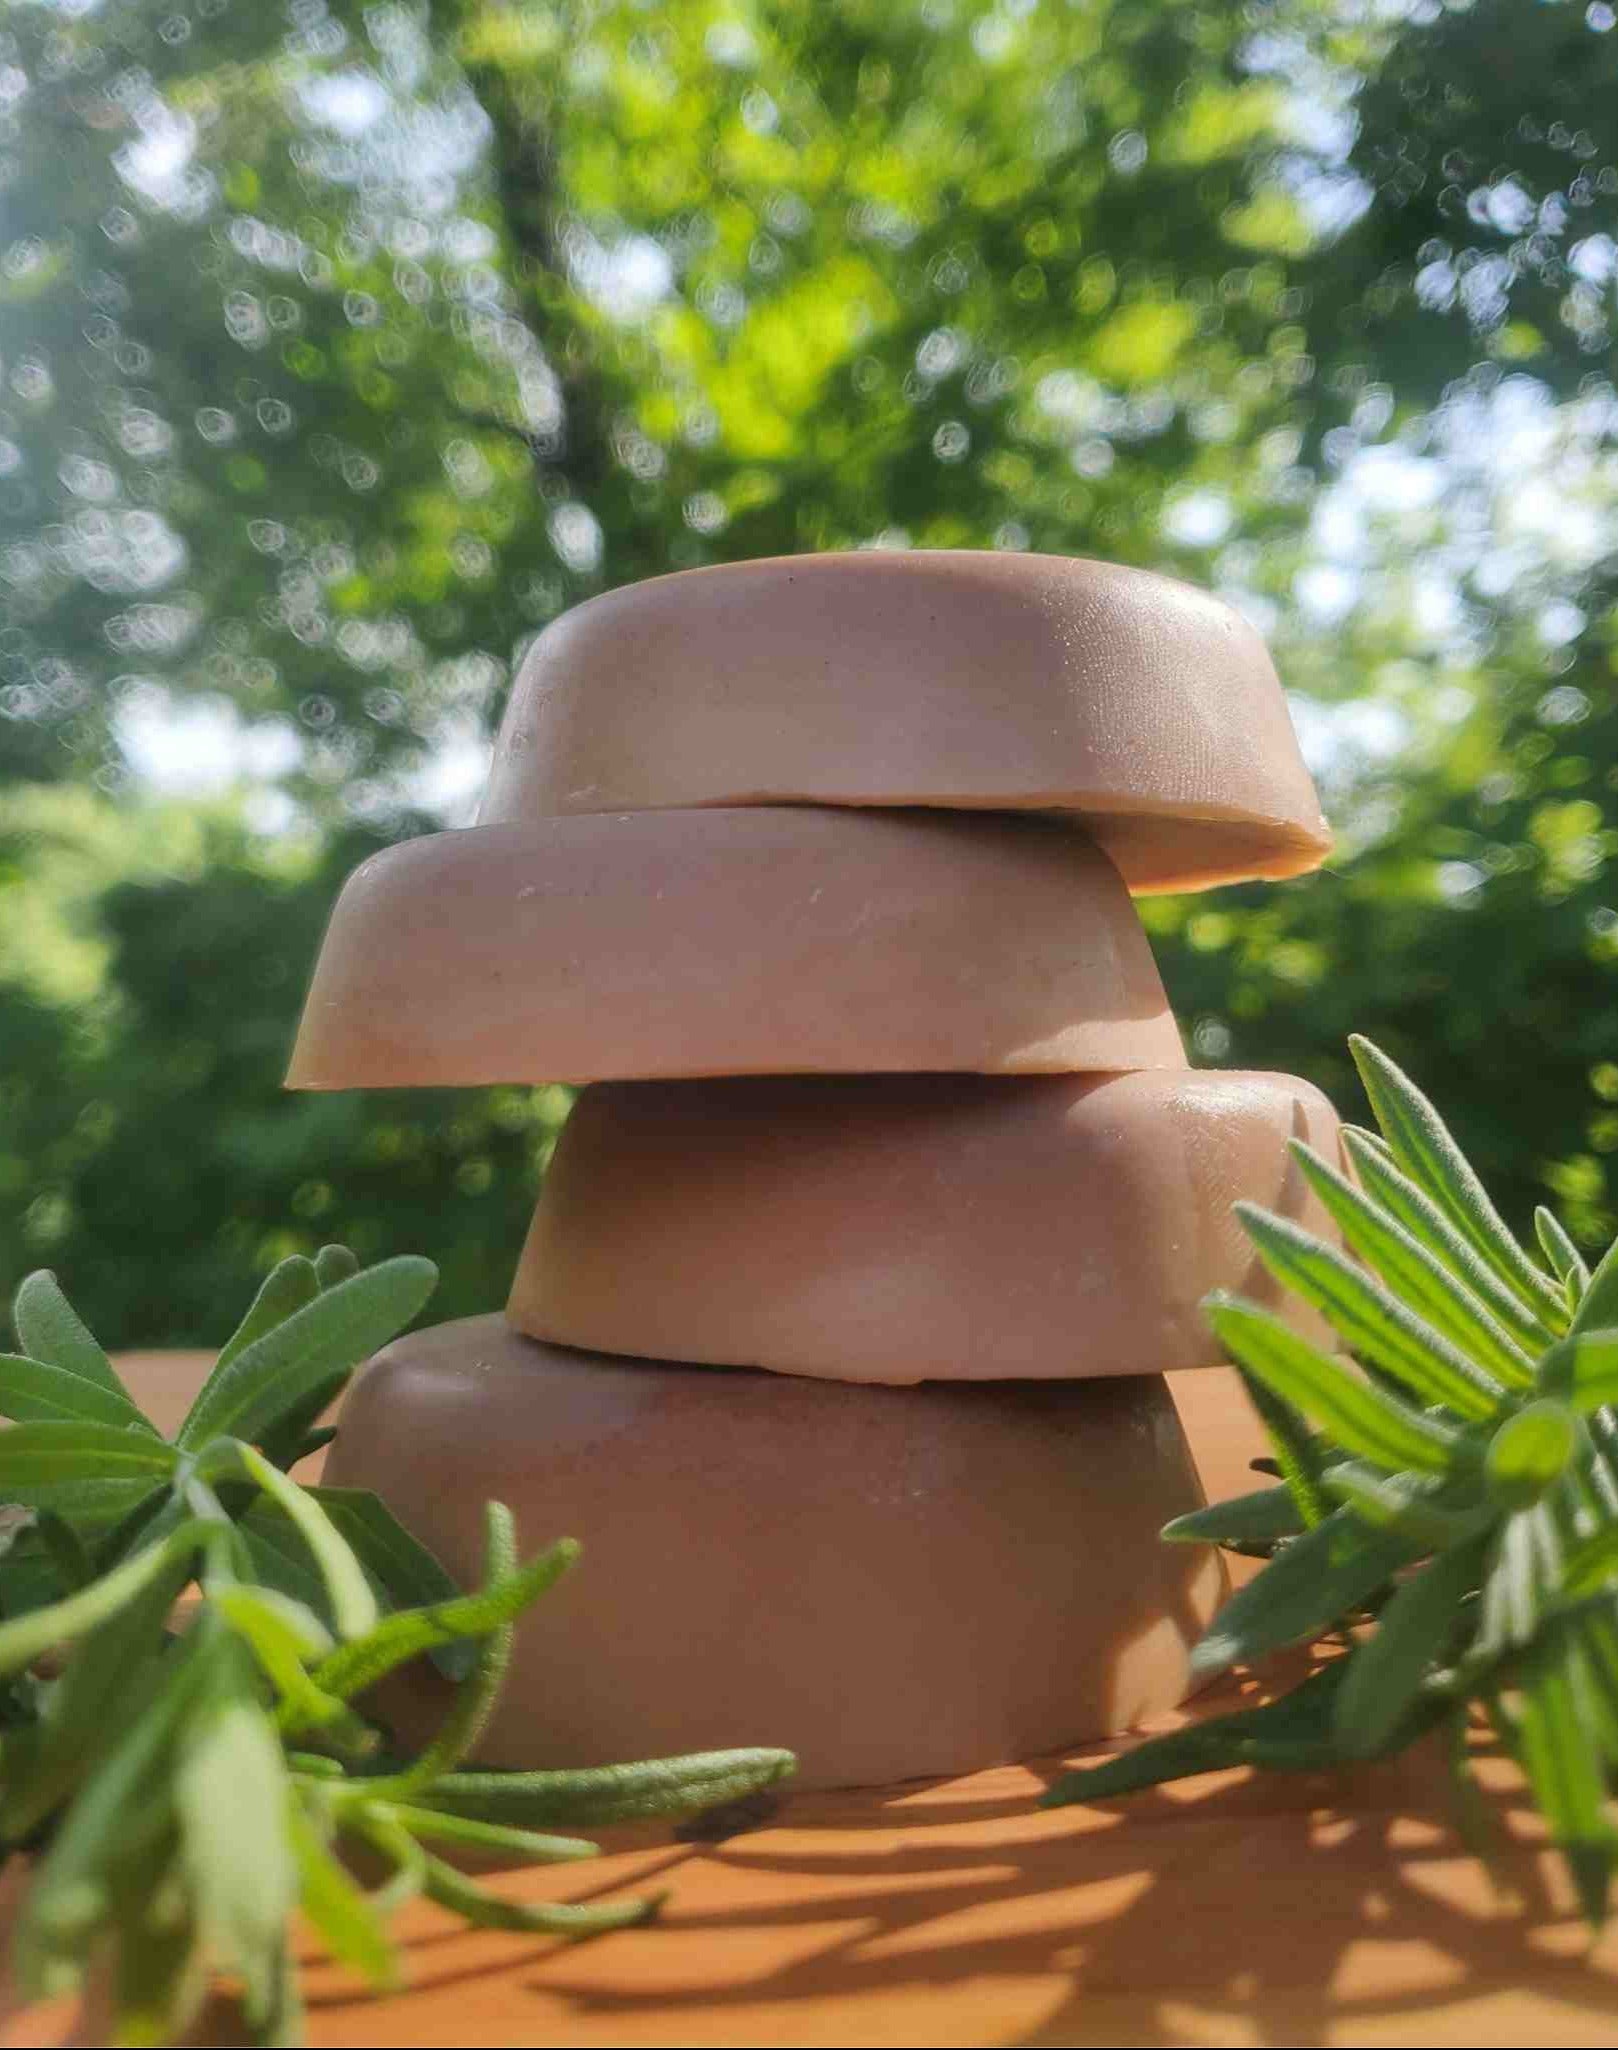 CBD Massage Bars stacked outside with rosemary sprigs beside